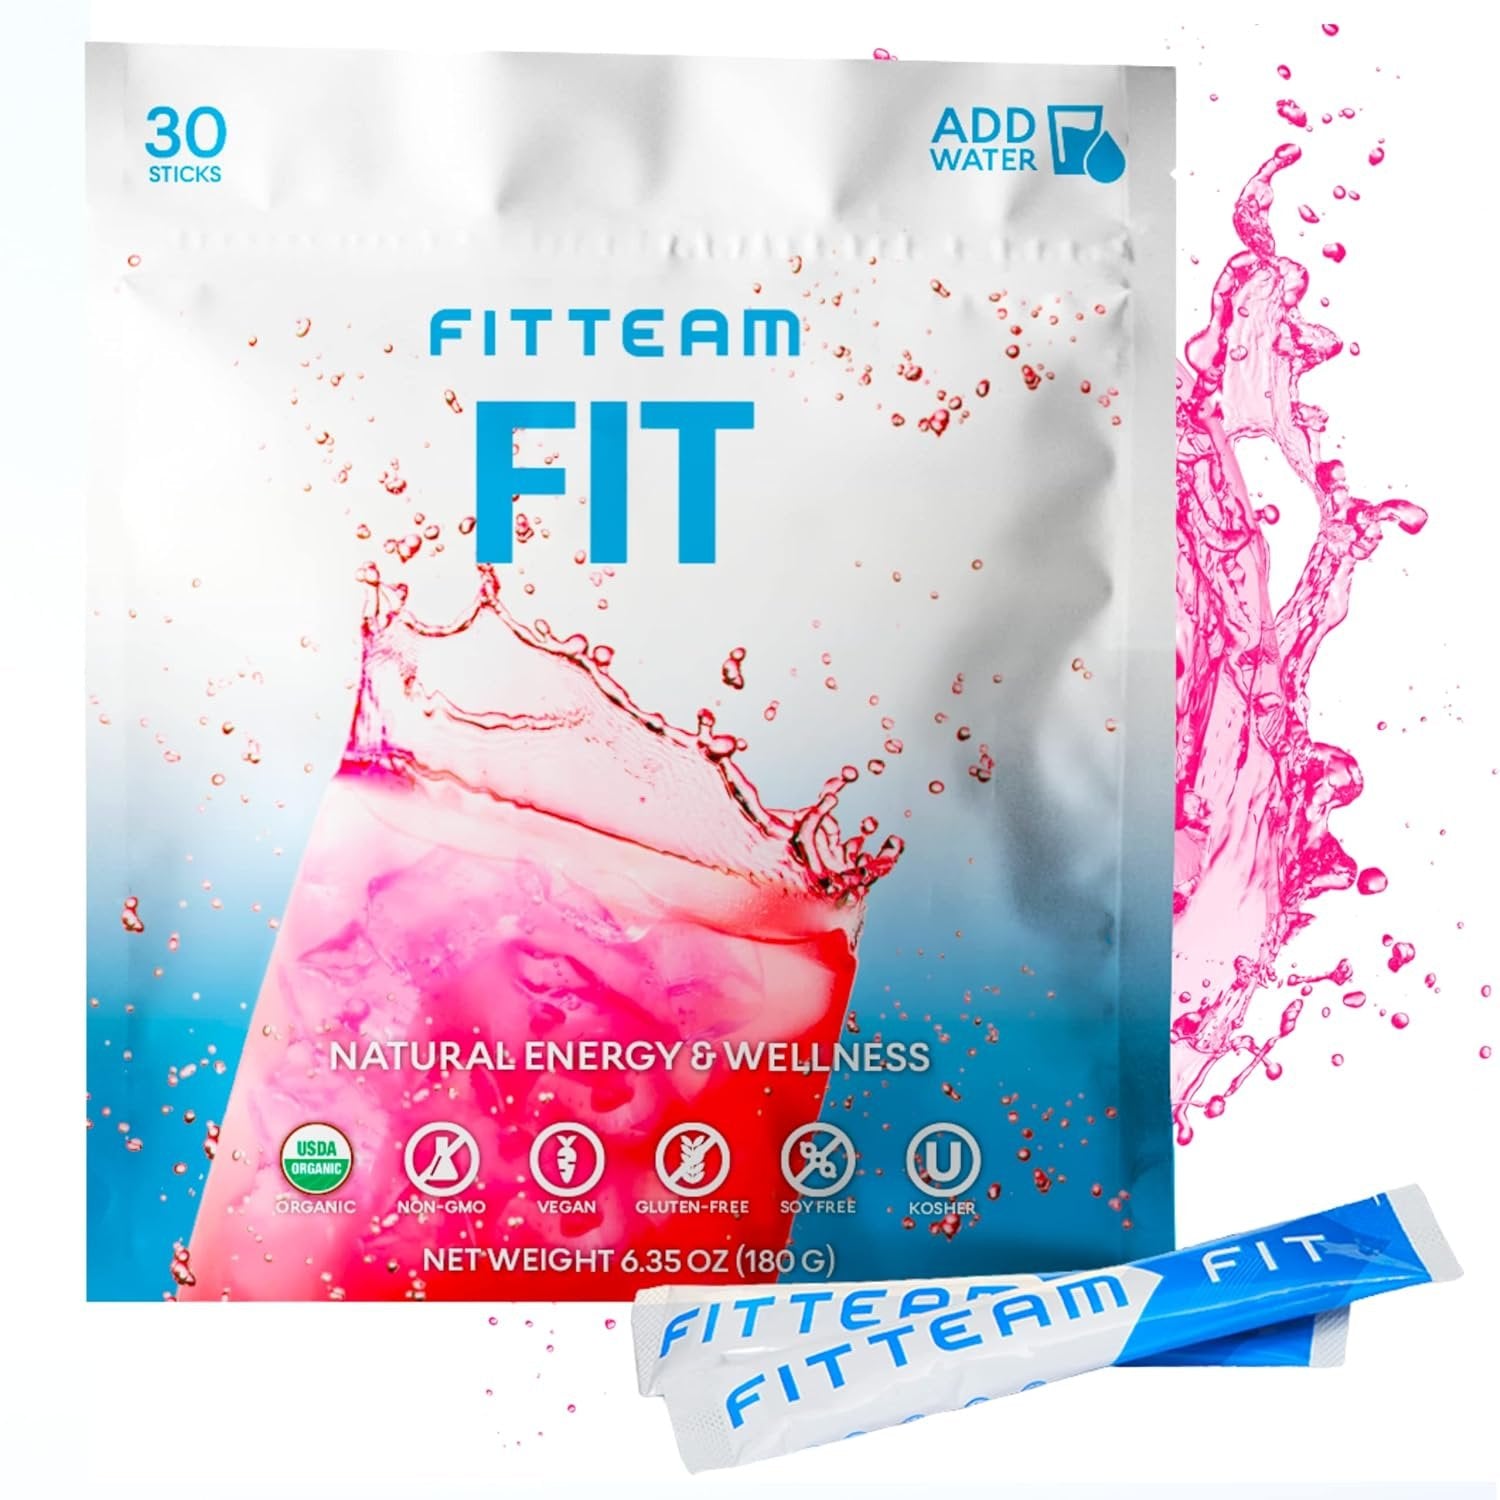 FITTEAM Fit Sticks Organic Energy and Wellness Beverage - Organic Energy Drink Mix - Mental Focus, Energy and Metabolism Boost - Mood Support and Antioxidants - 30 Individually Wrapped Stick Packs